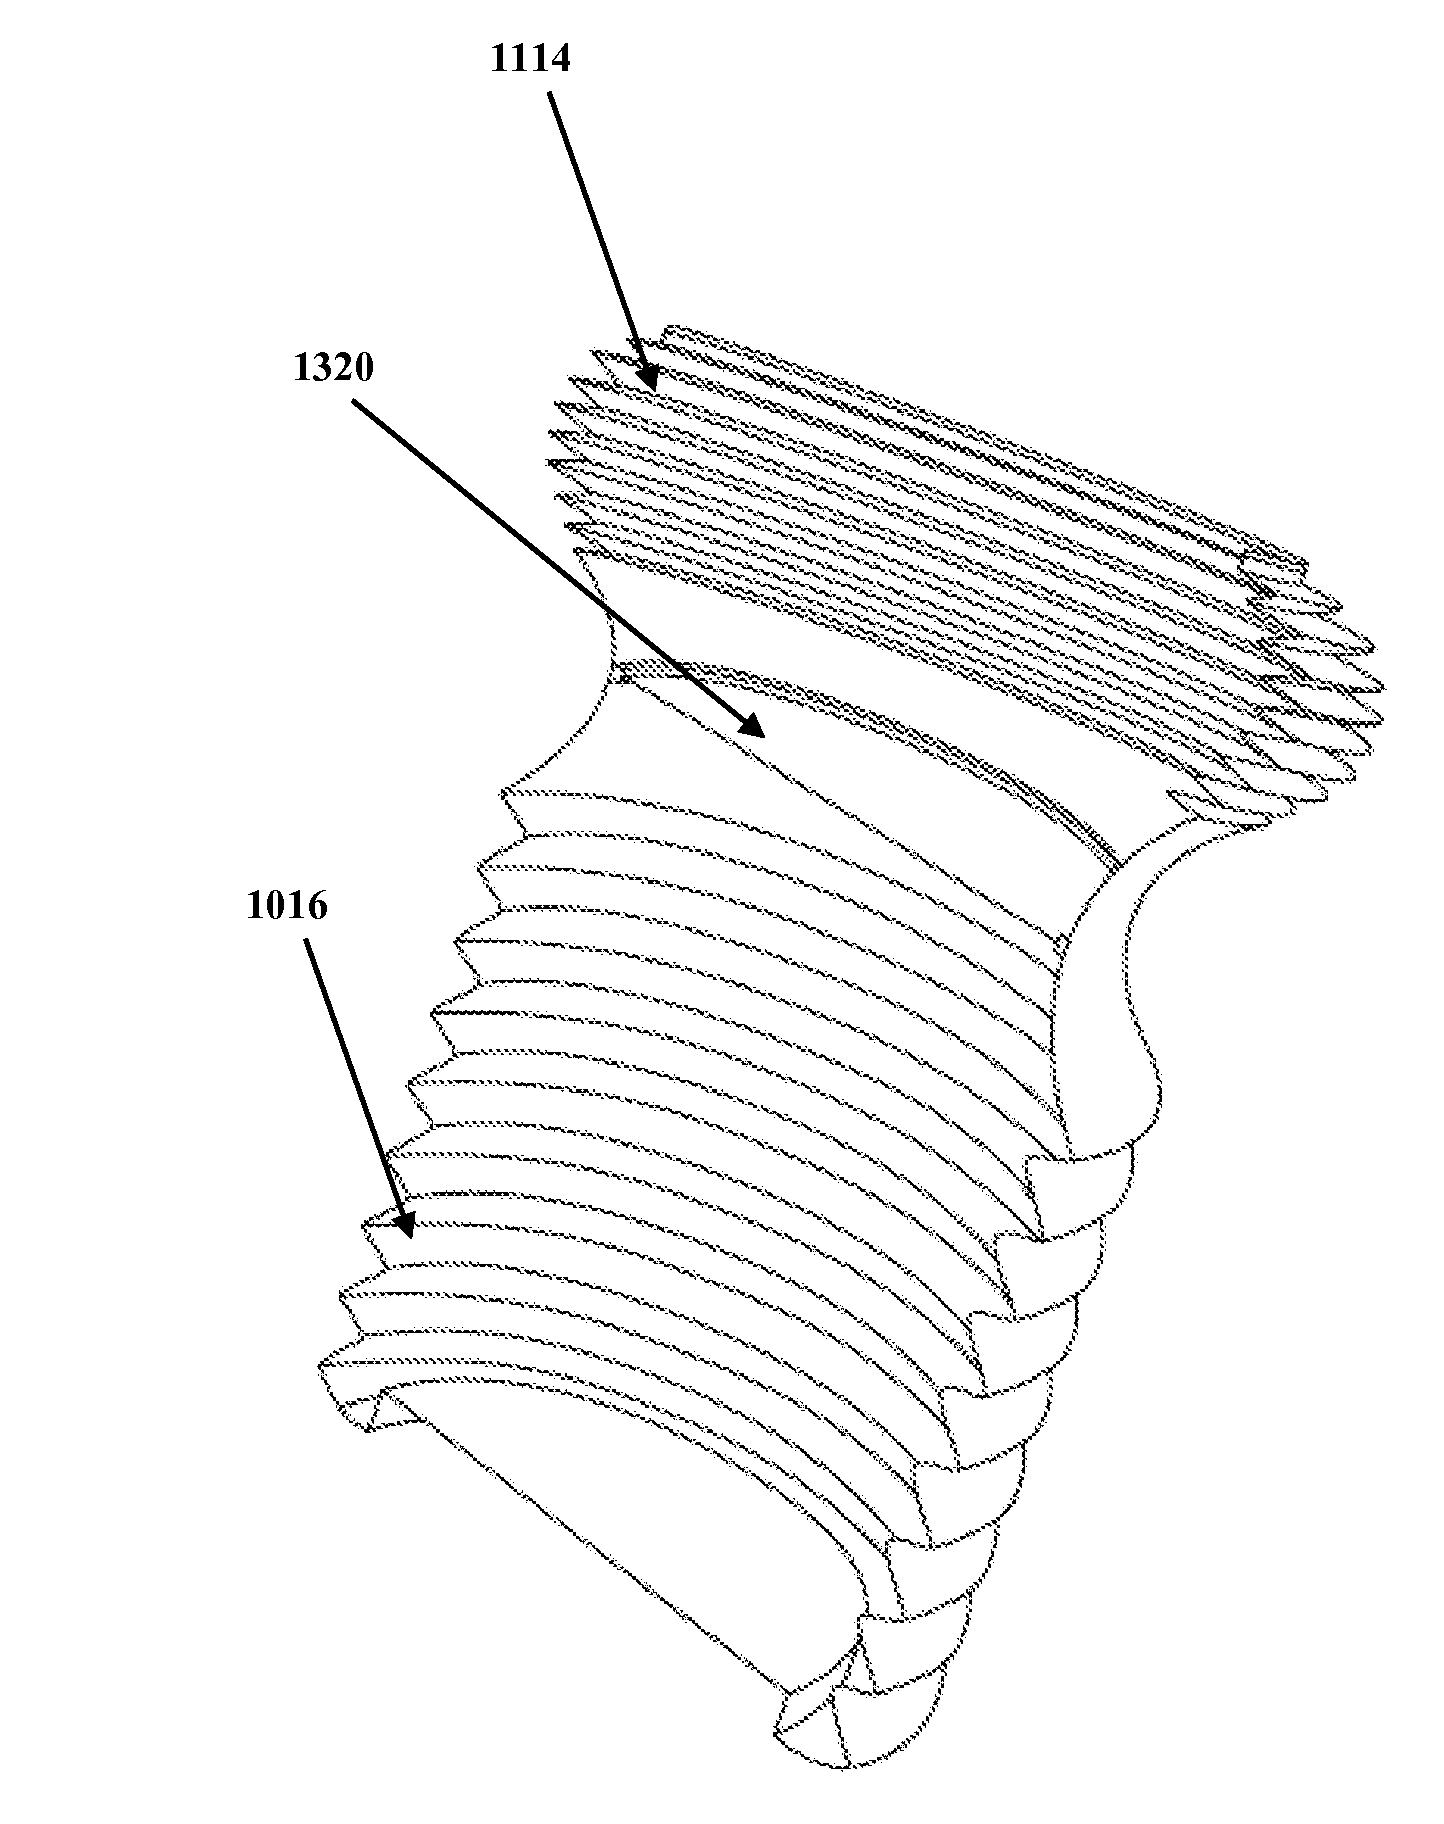 Manually activated flexible reconstituting container